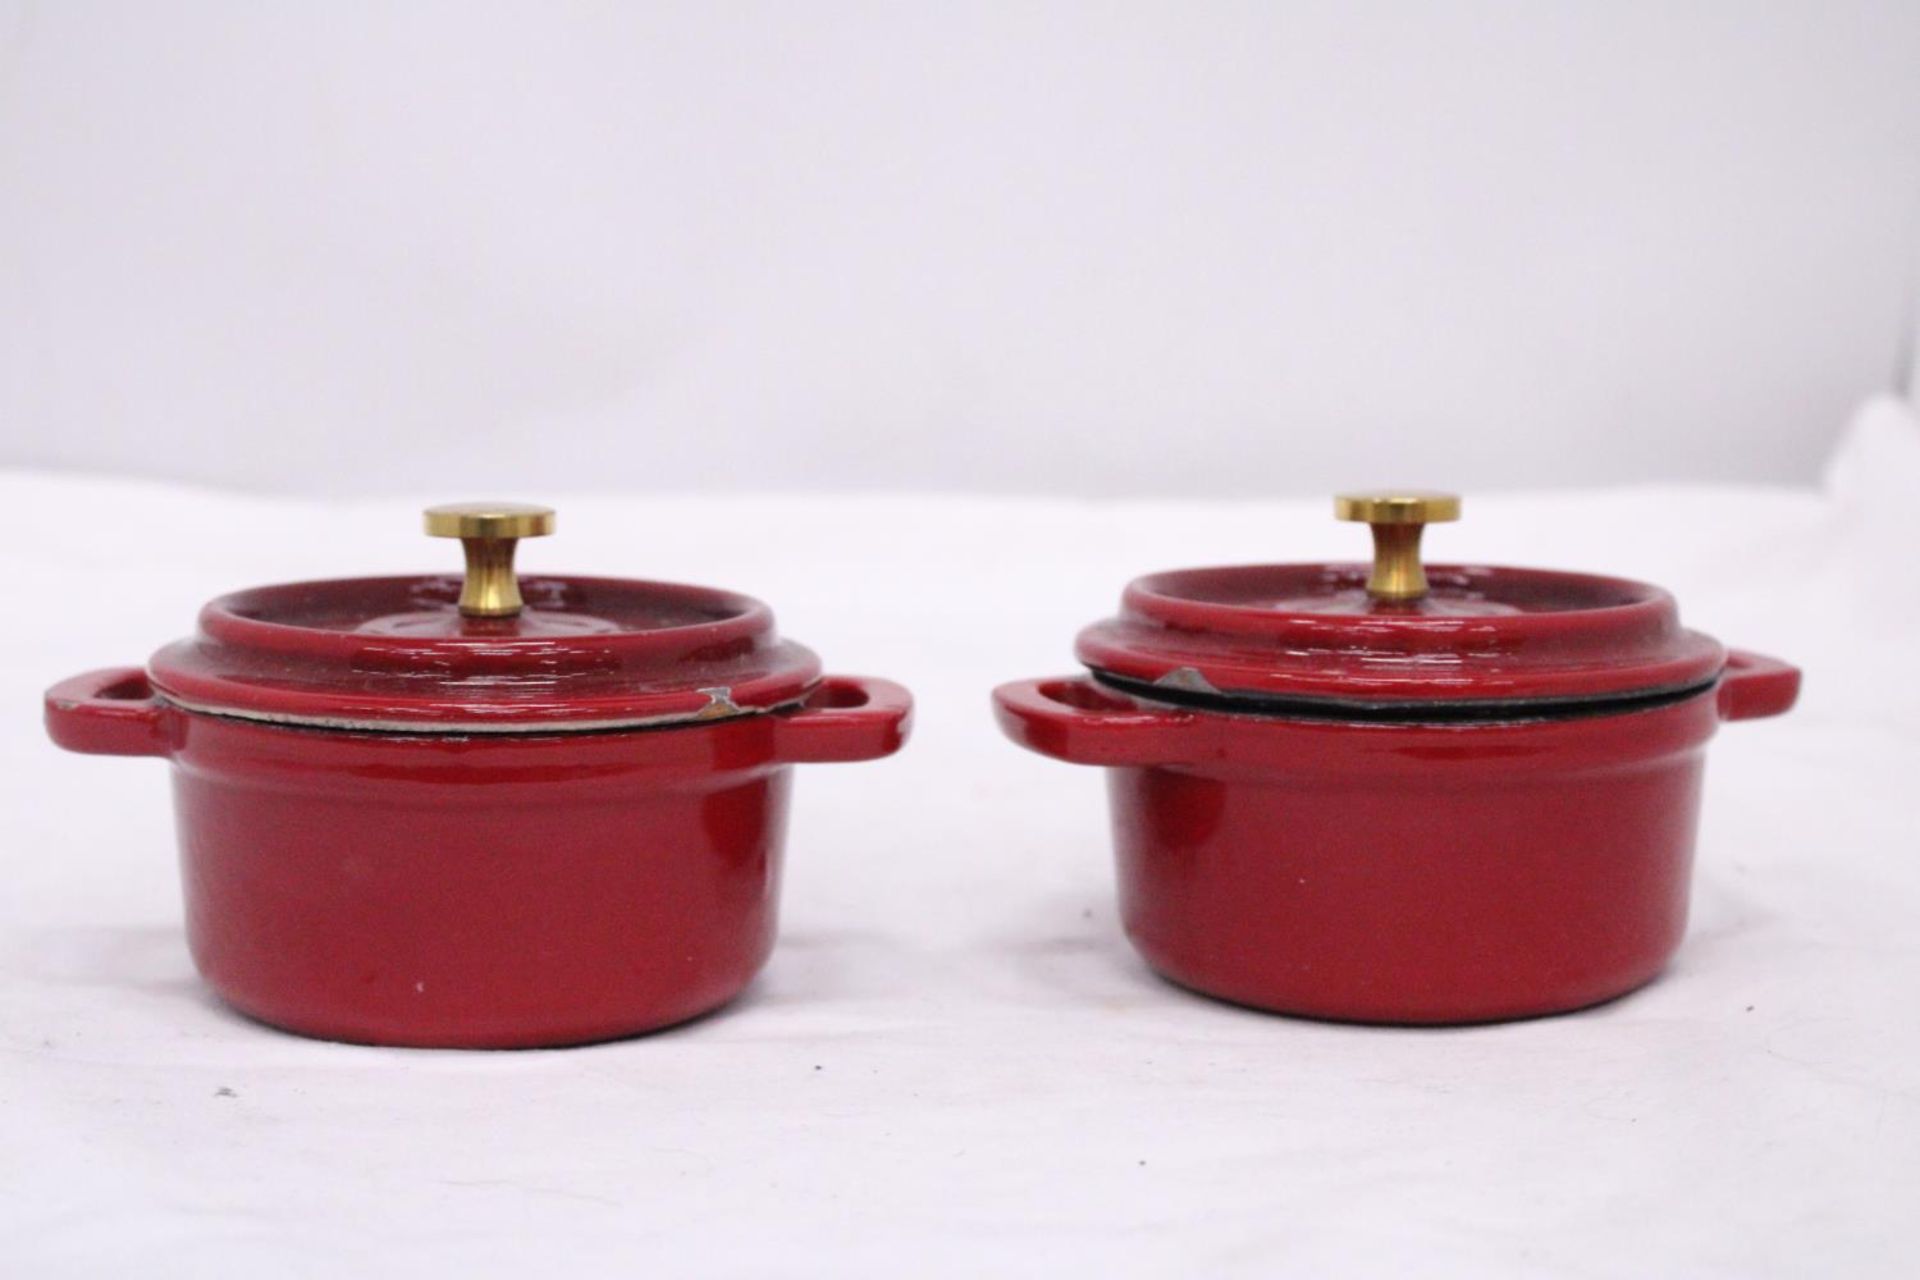 TWO MINI CAST IRON LIDDED COOKING POTS - Image 4 of 4